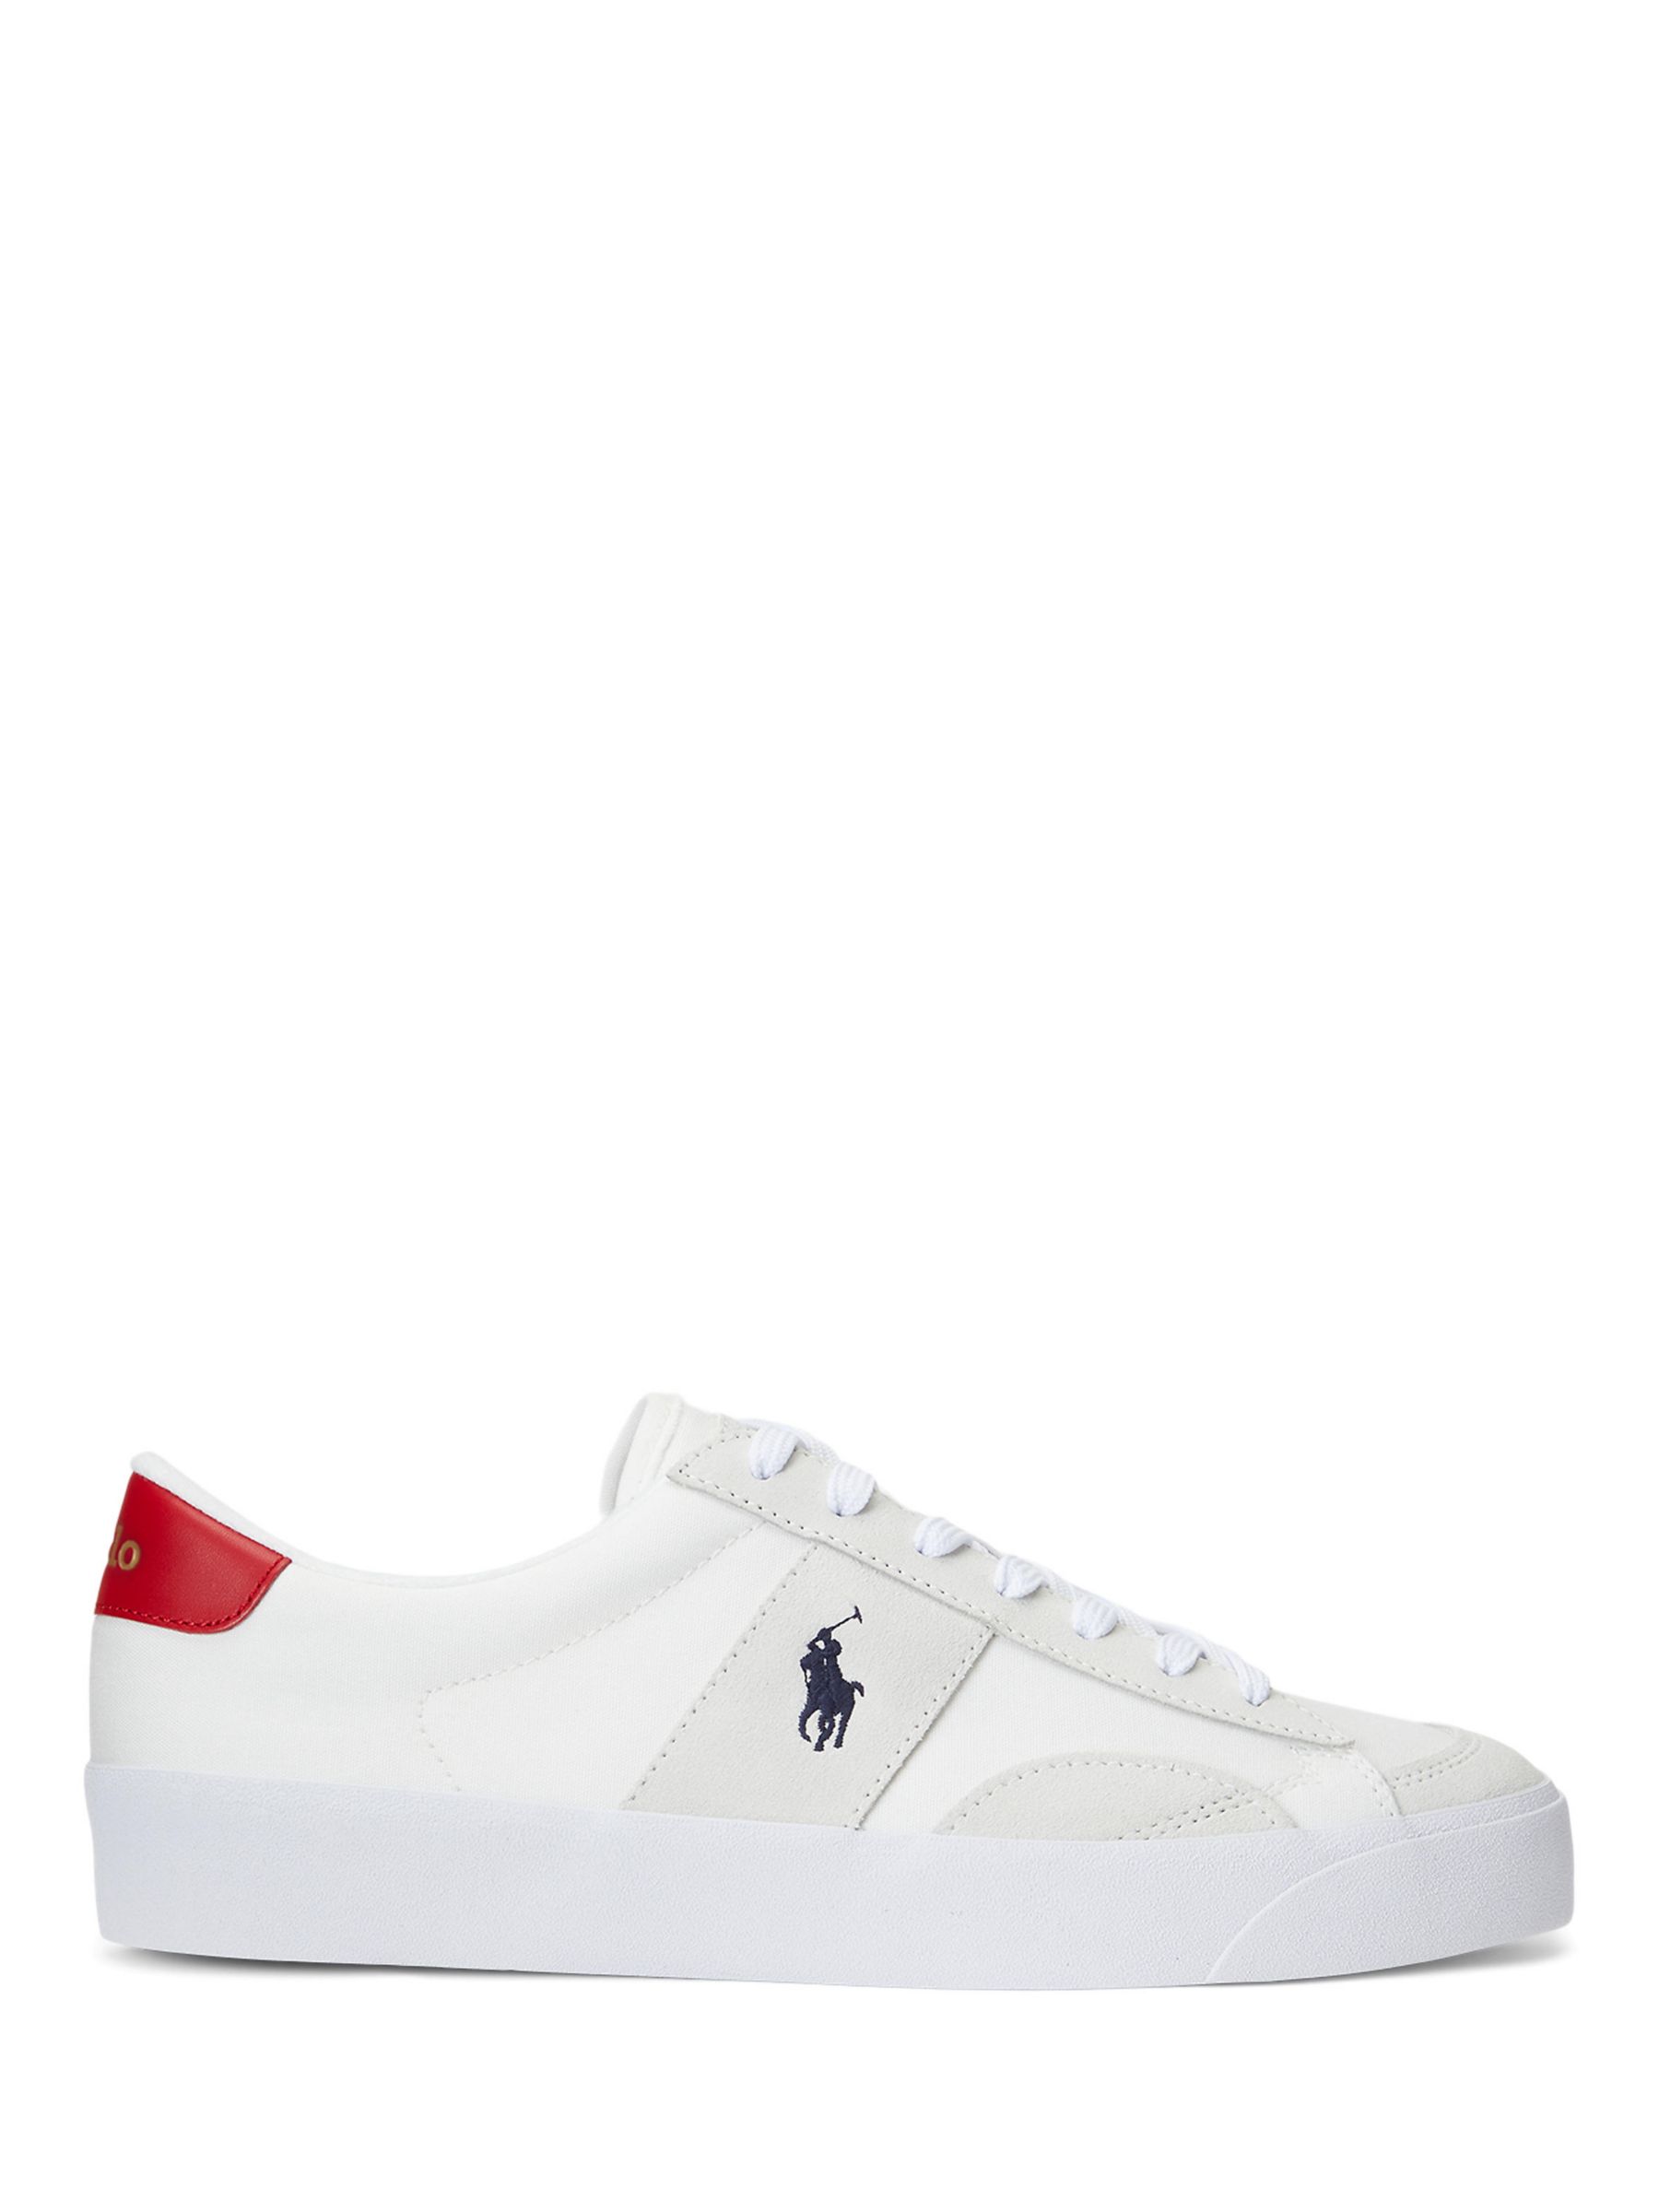 Ralph Lauren Sayer Classic Court Trainers, White/Red at John Lewis ...